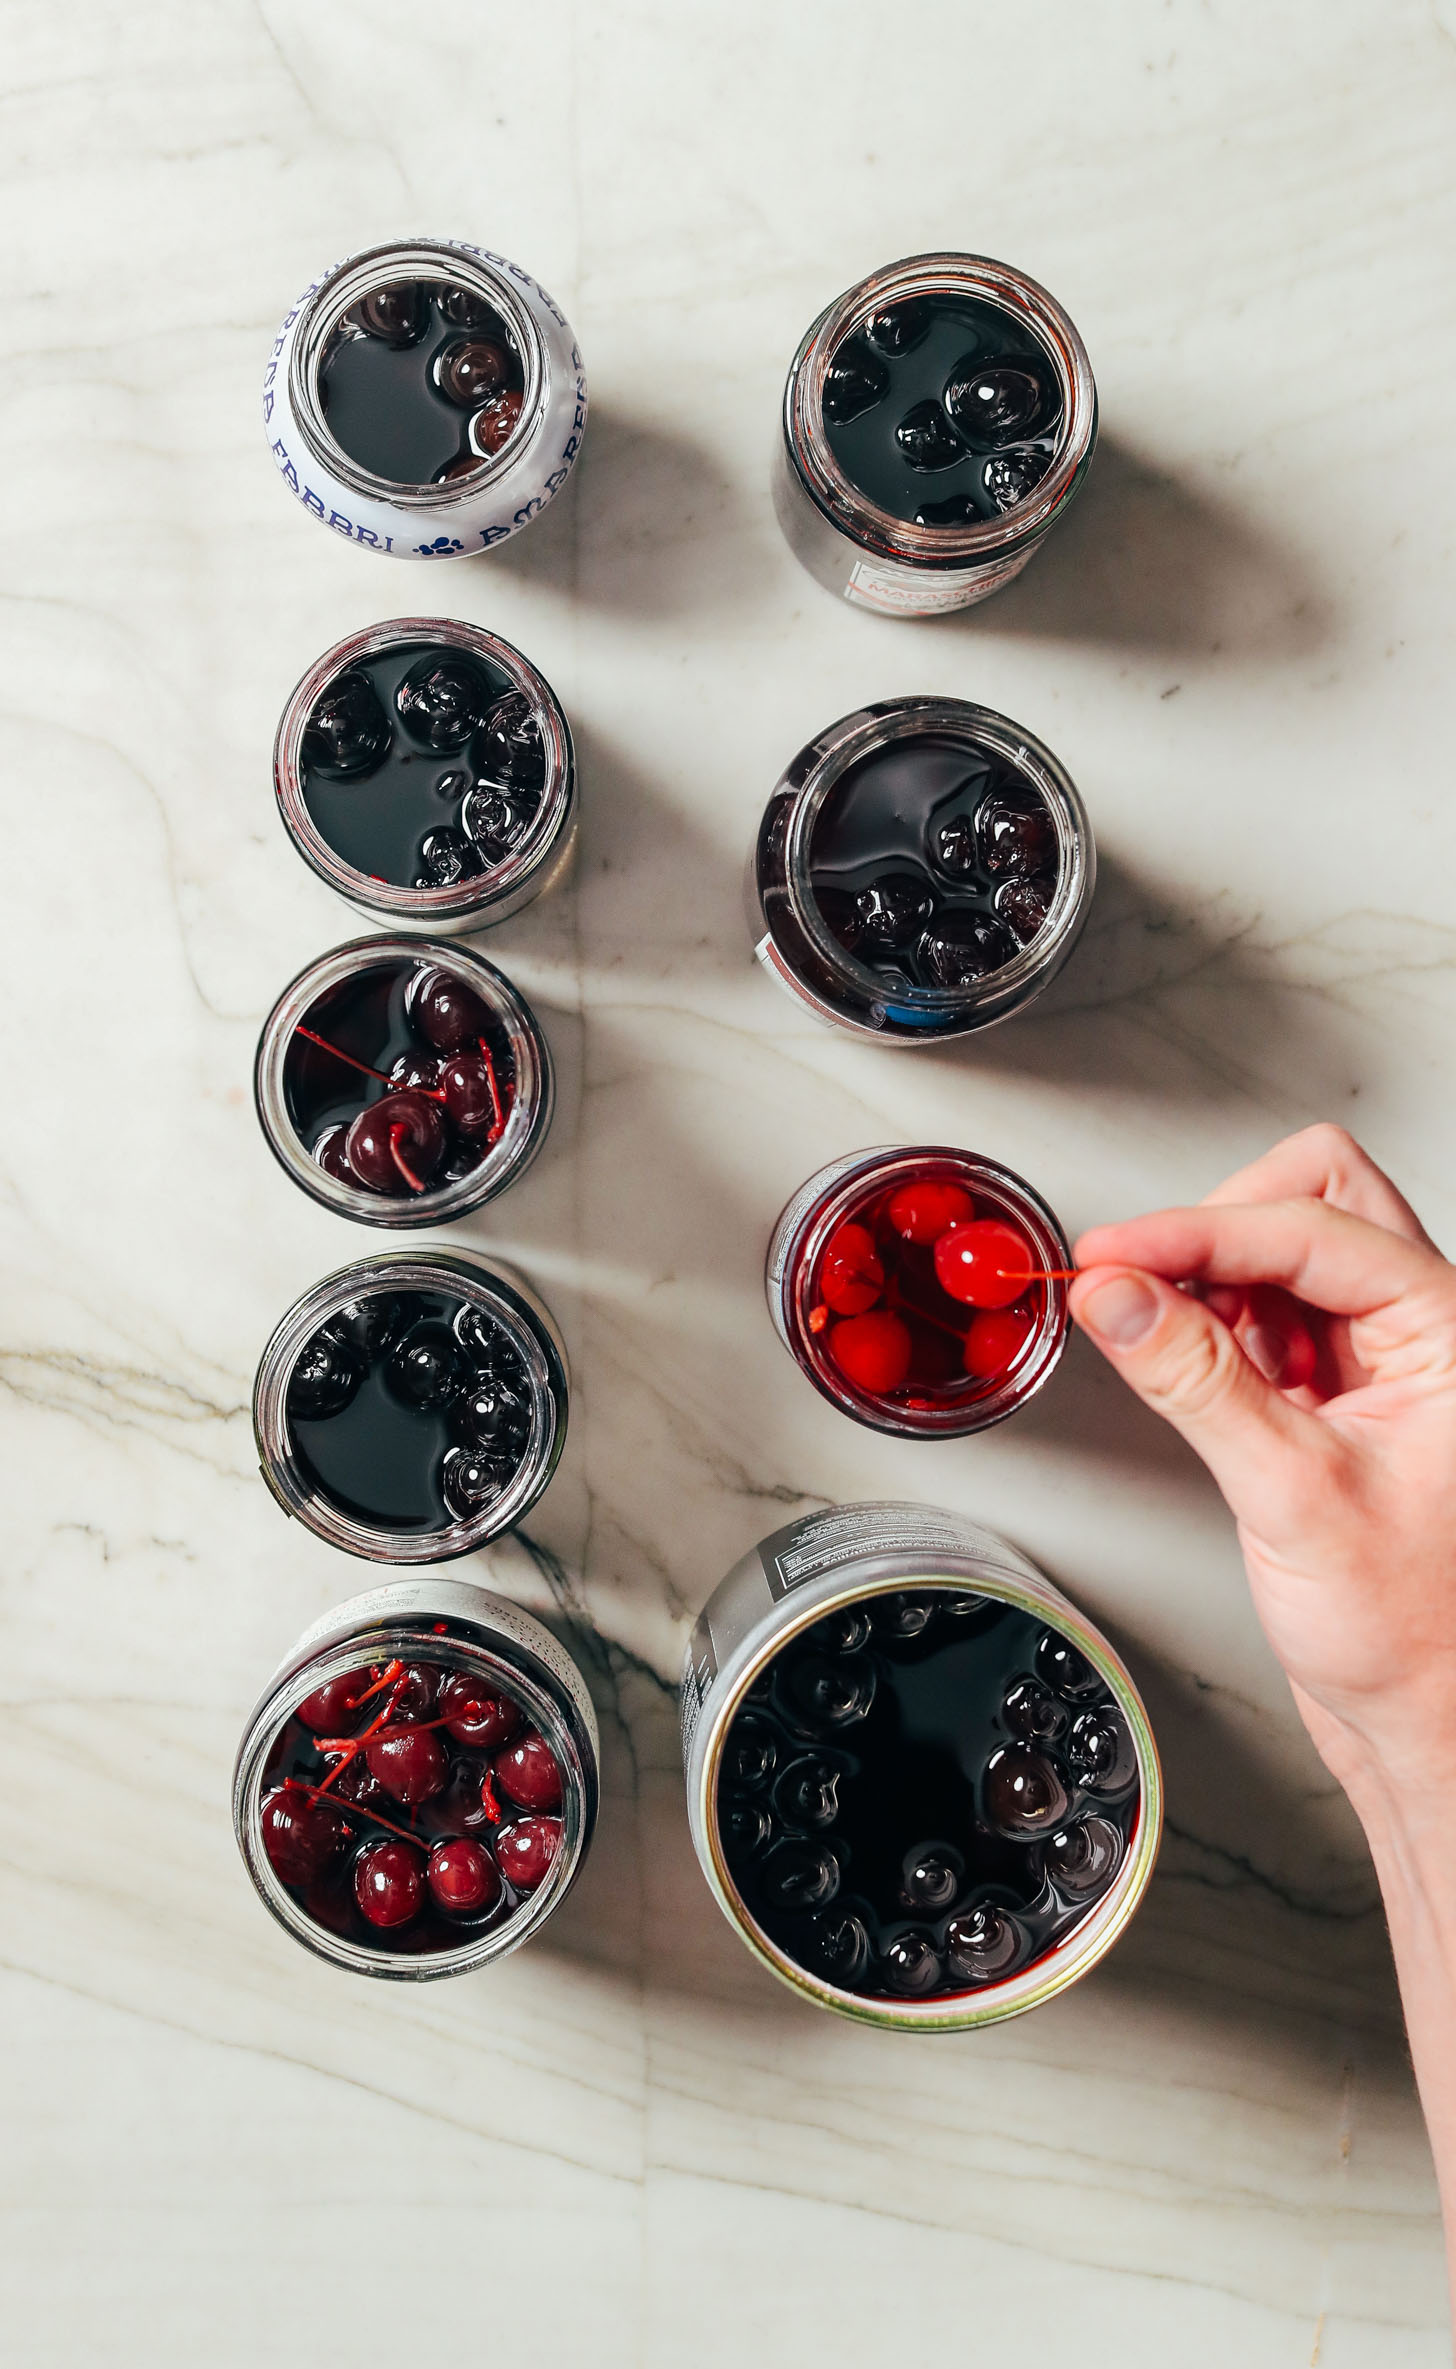 Assortment of cocktail cherries including in heavy and light syrup